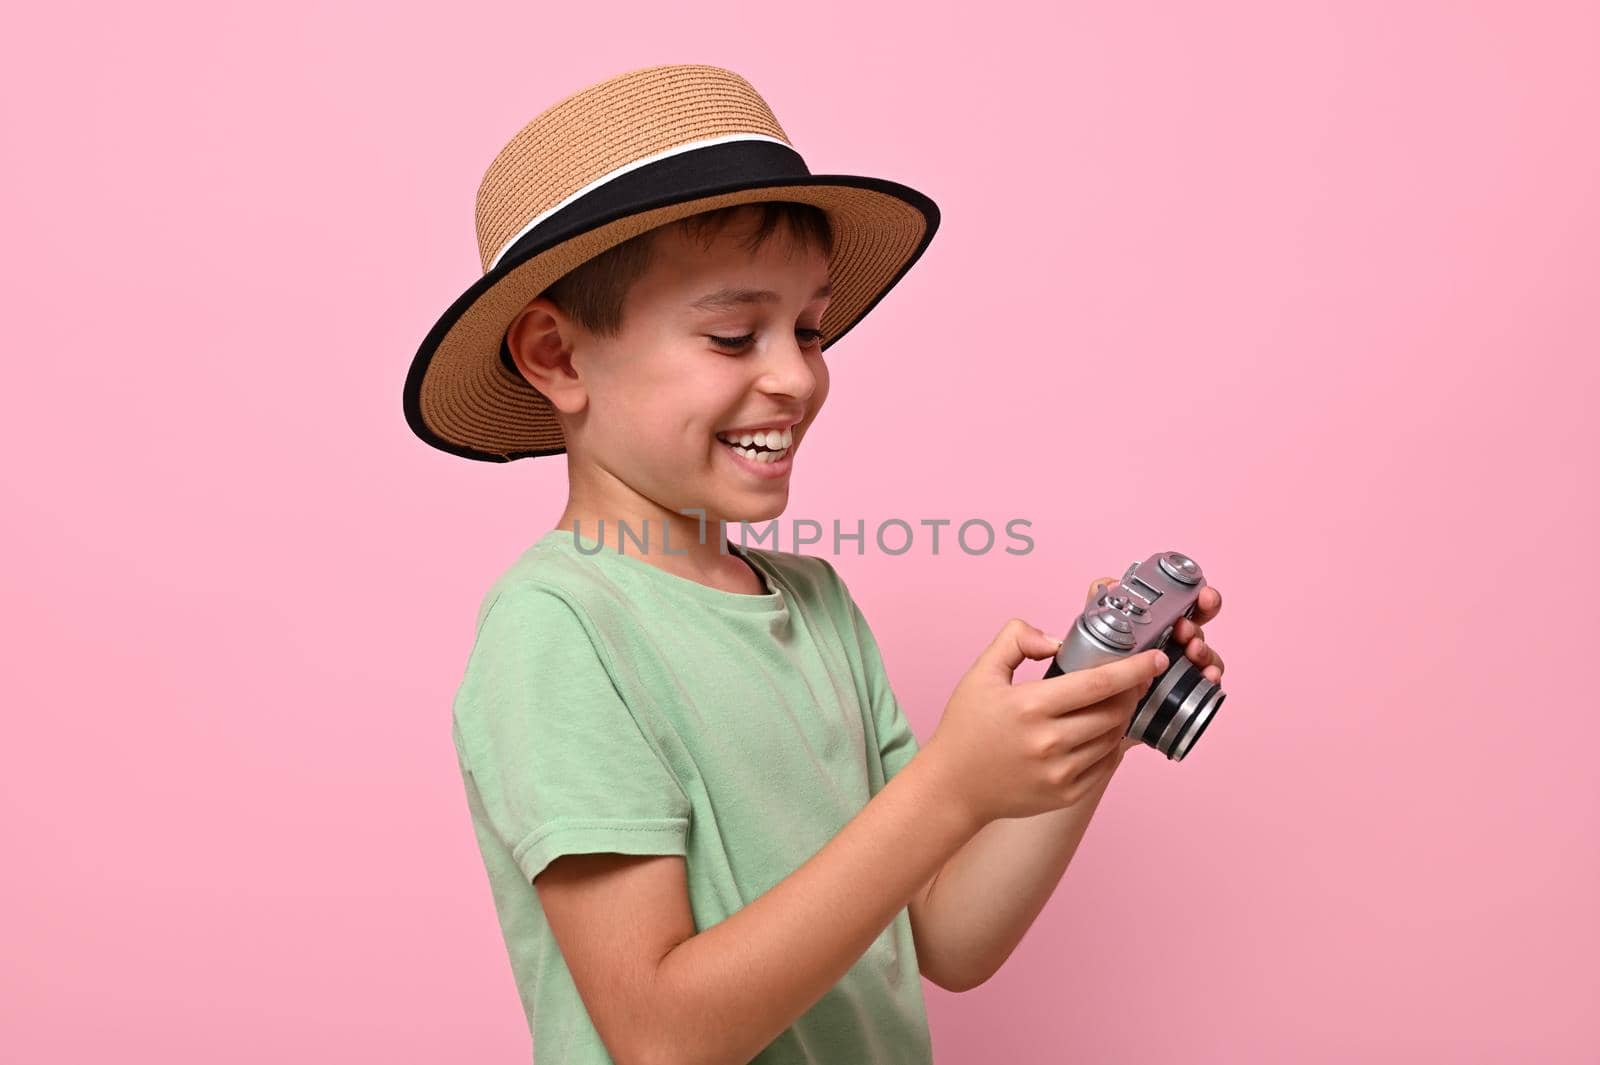 Happy cheerful child in summer outfit holding a retro vintage camera and cutely smiles with toothy smile posing over pink background with copy space. Tourism concepts